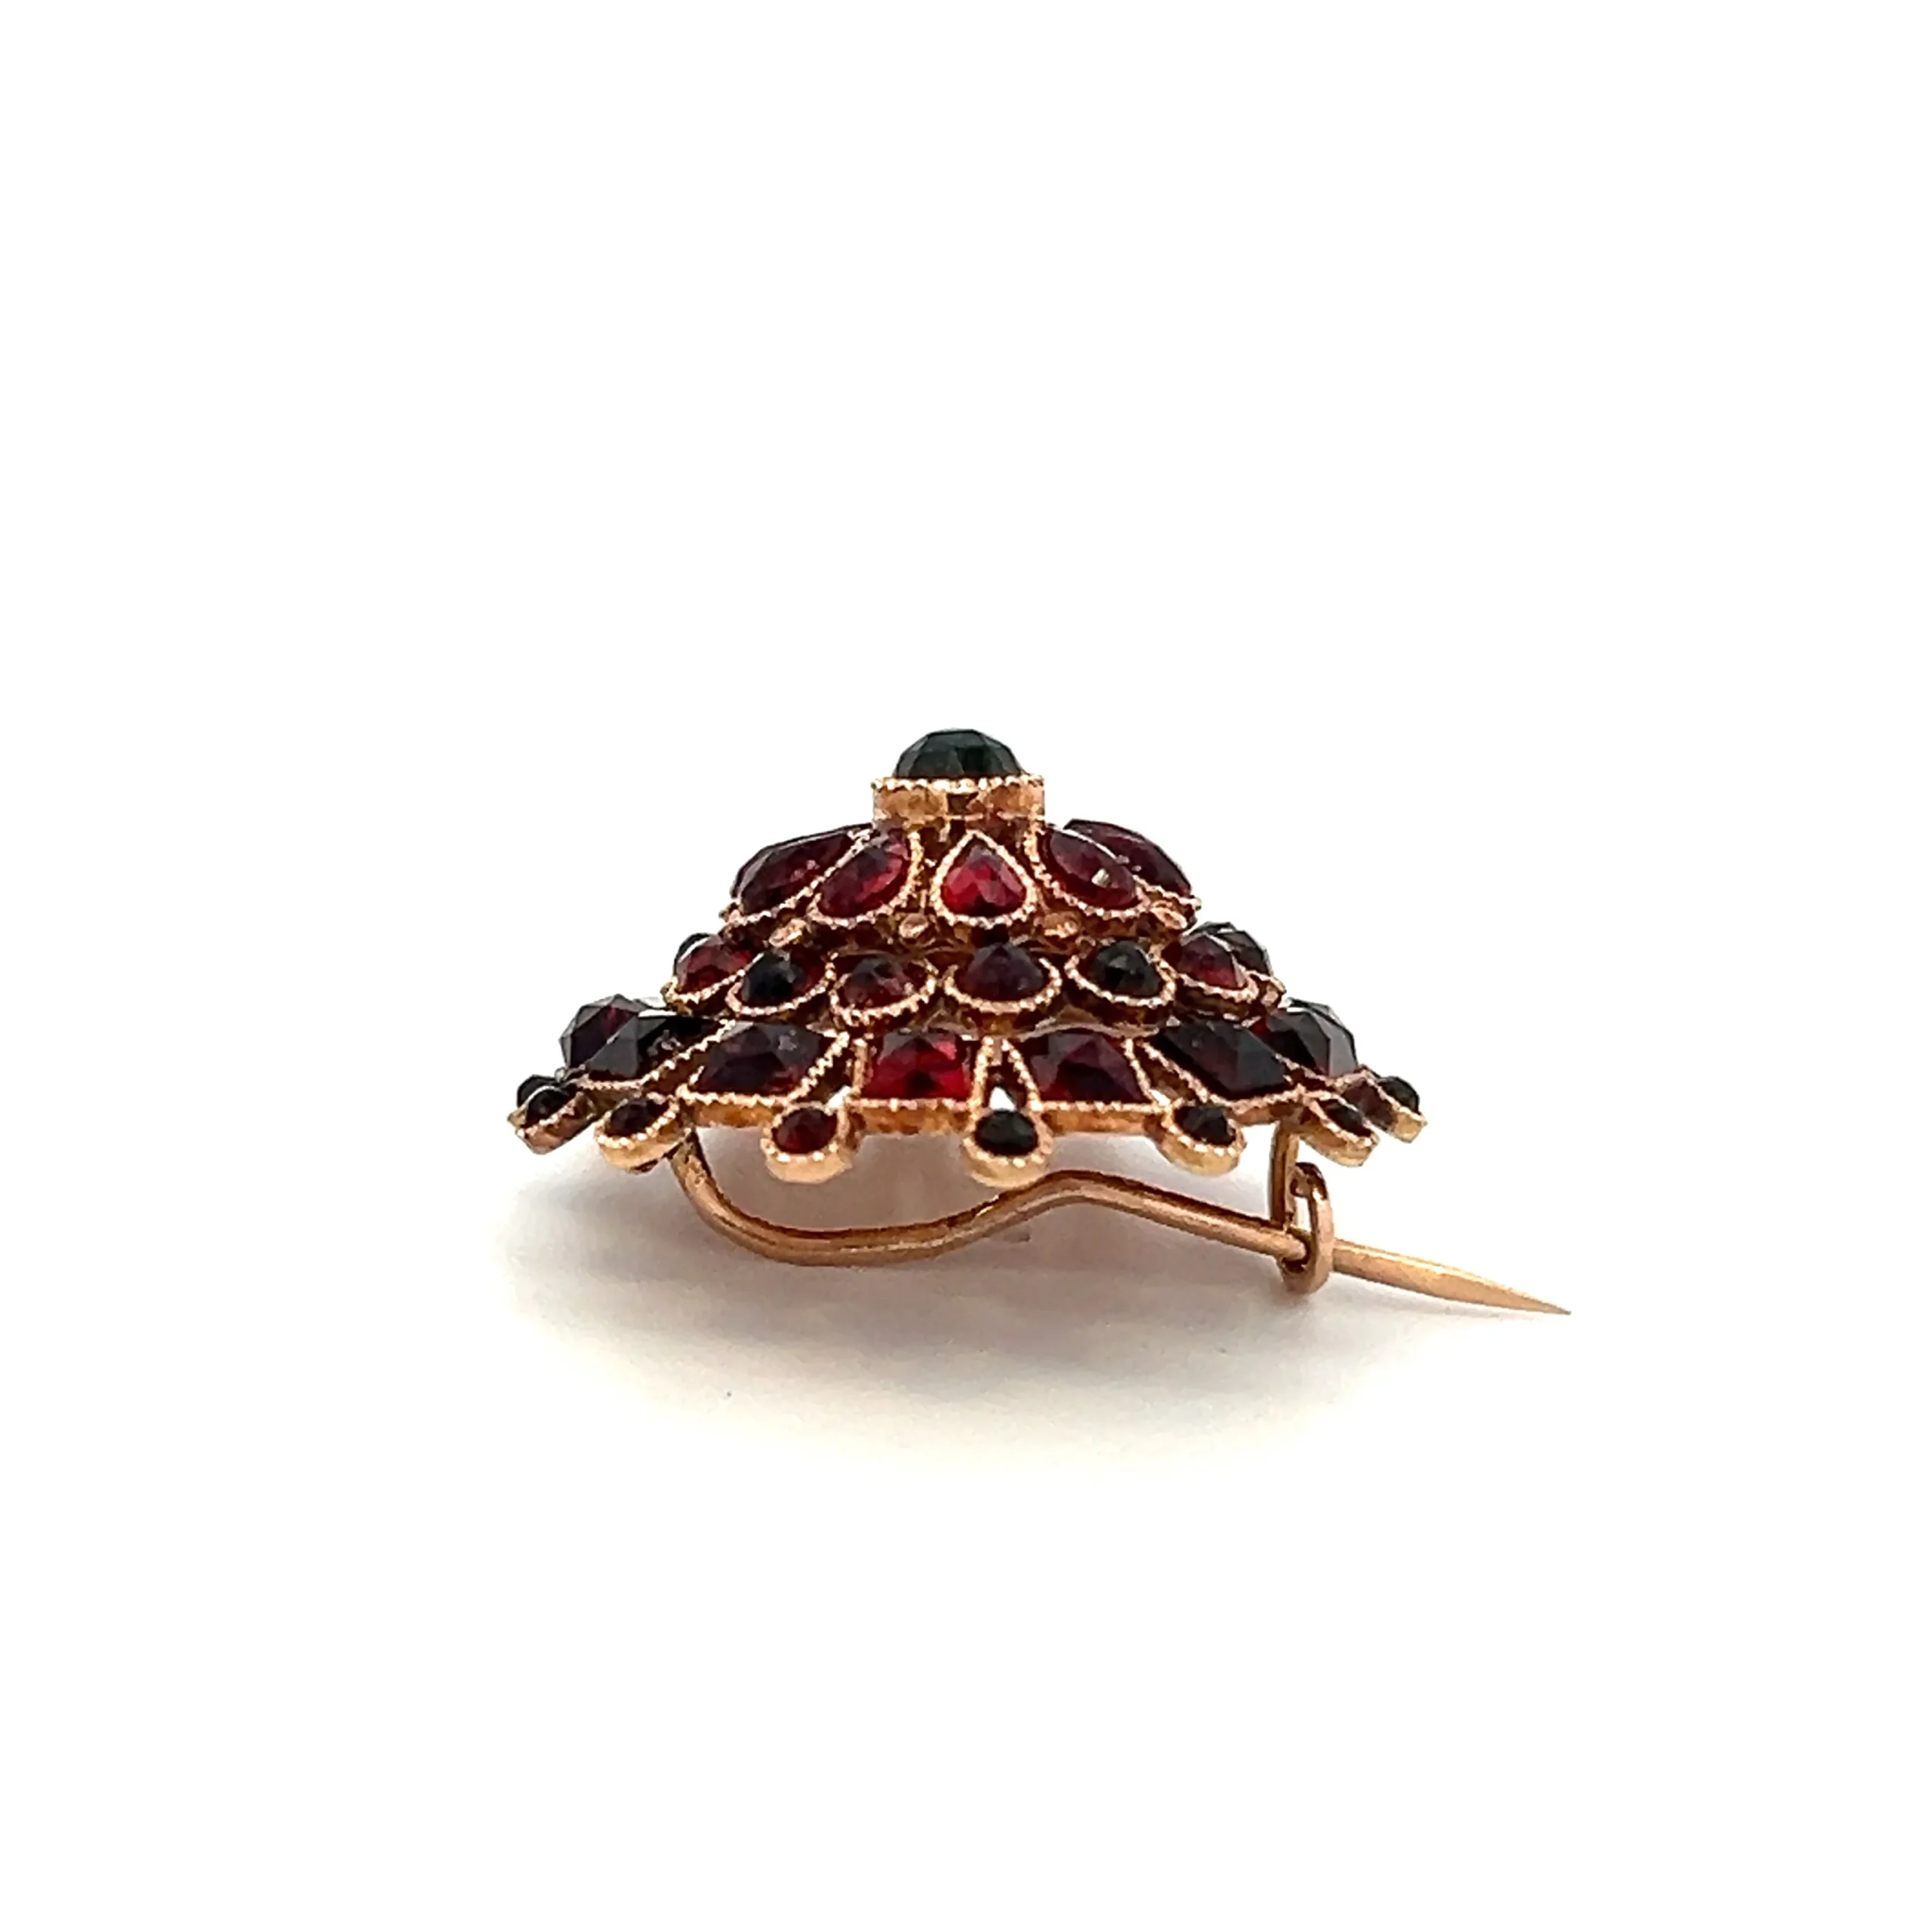 One sterling silver and vermeil cluster-style sunburst brooch with 53 faceted garnets in round, pear, and square shapes in a sunburst design. Each garnet is in a delicate rope bezel setting.